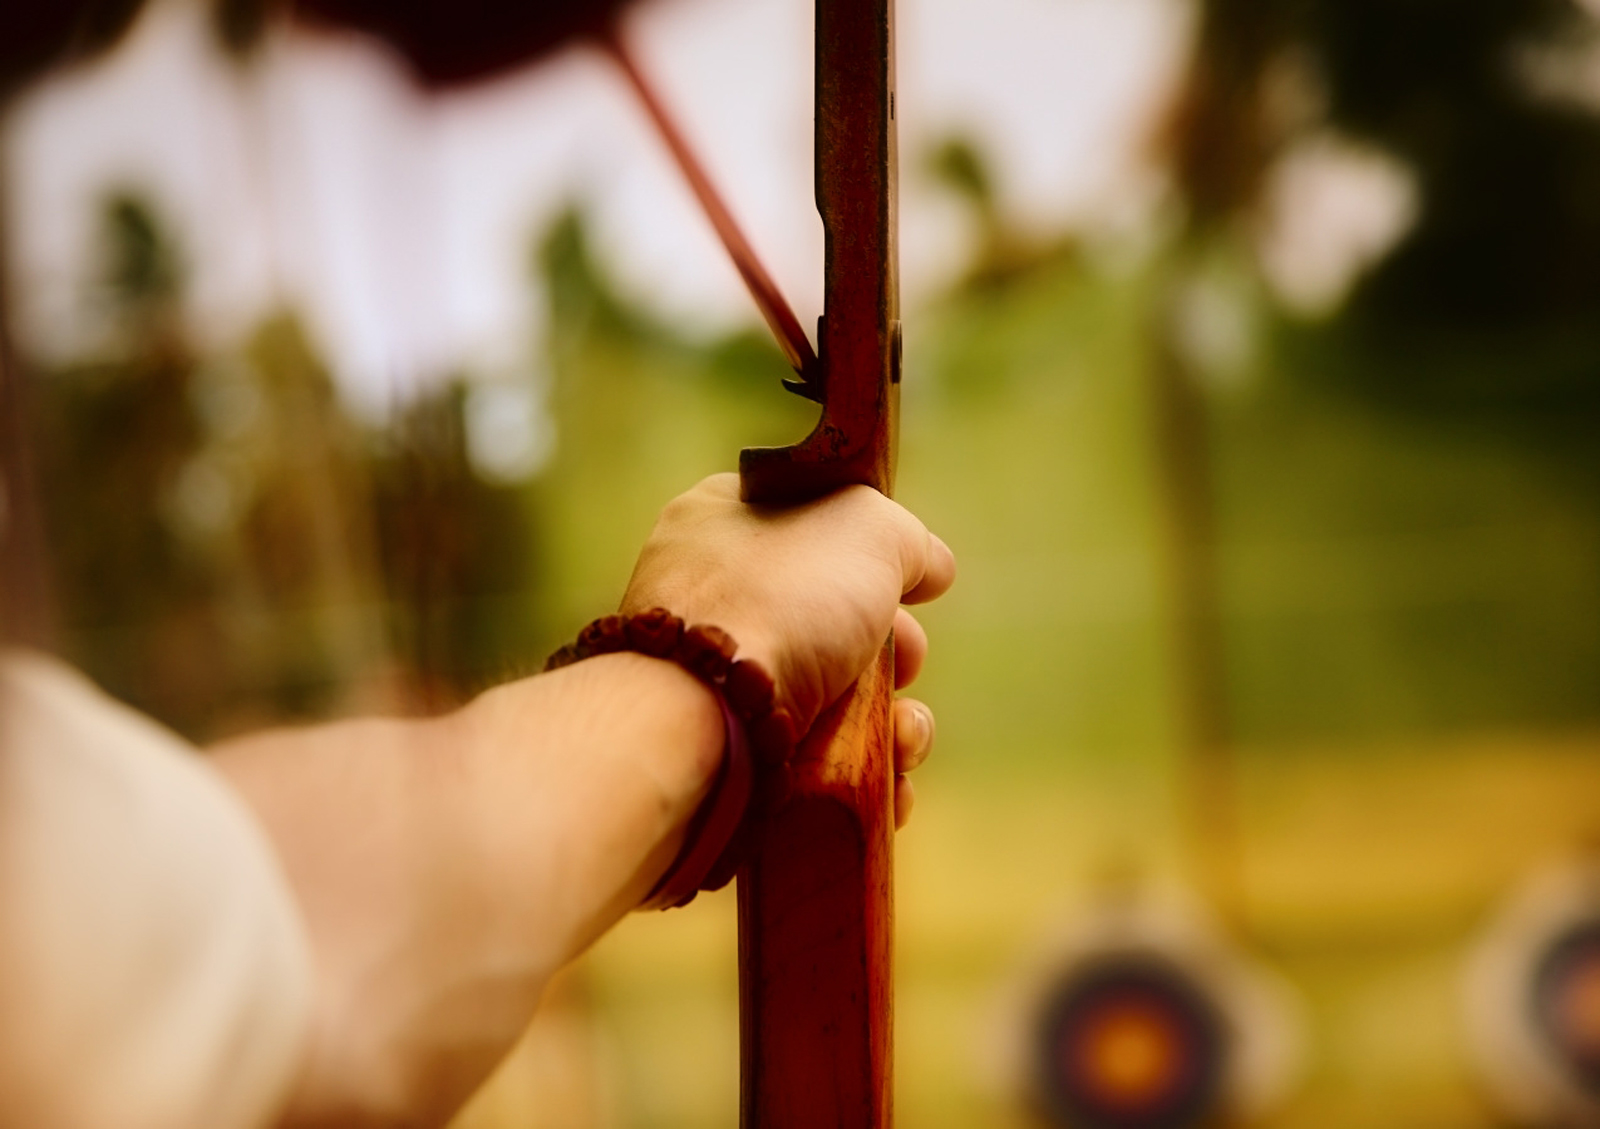 12 Archery HD Wallpapers Backgrounds - Wallpaper Abyss